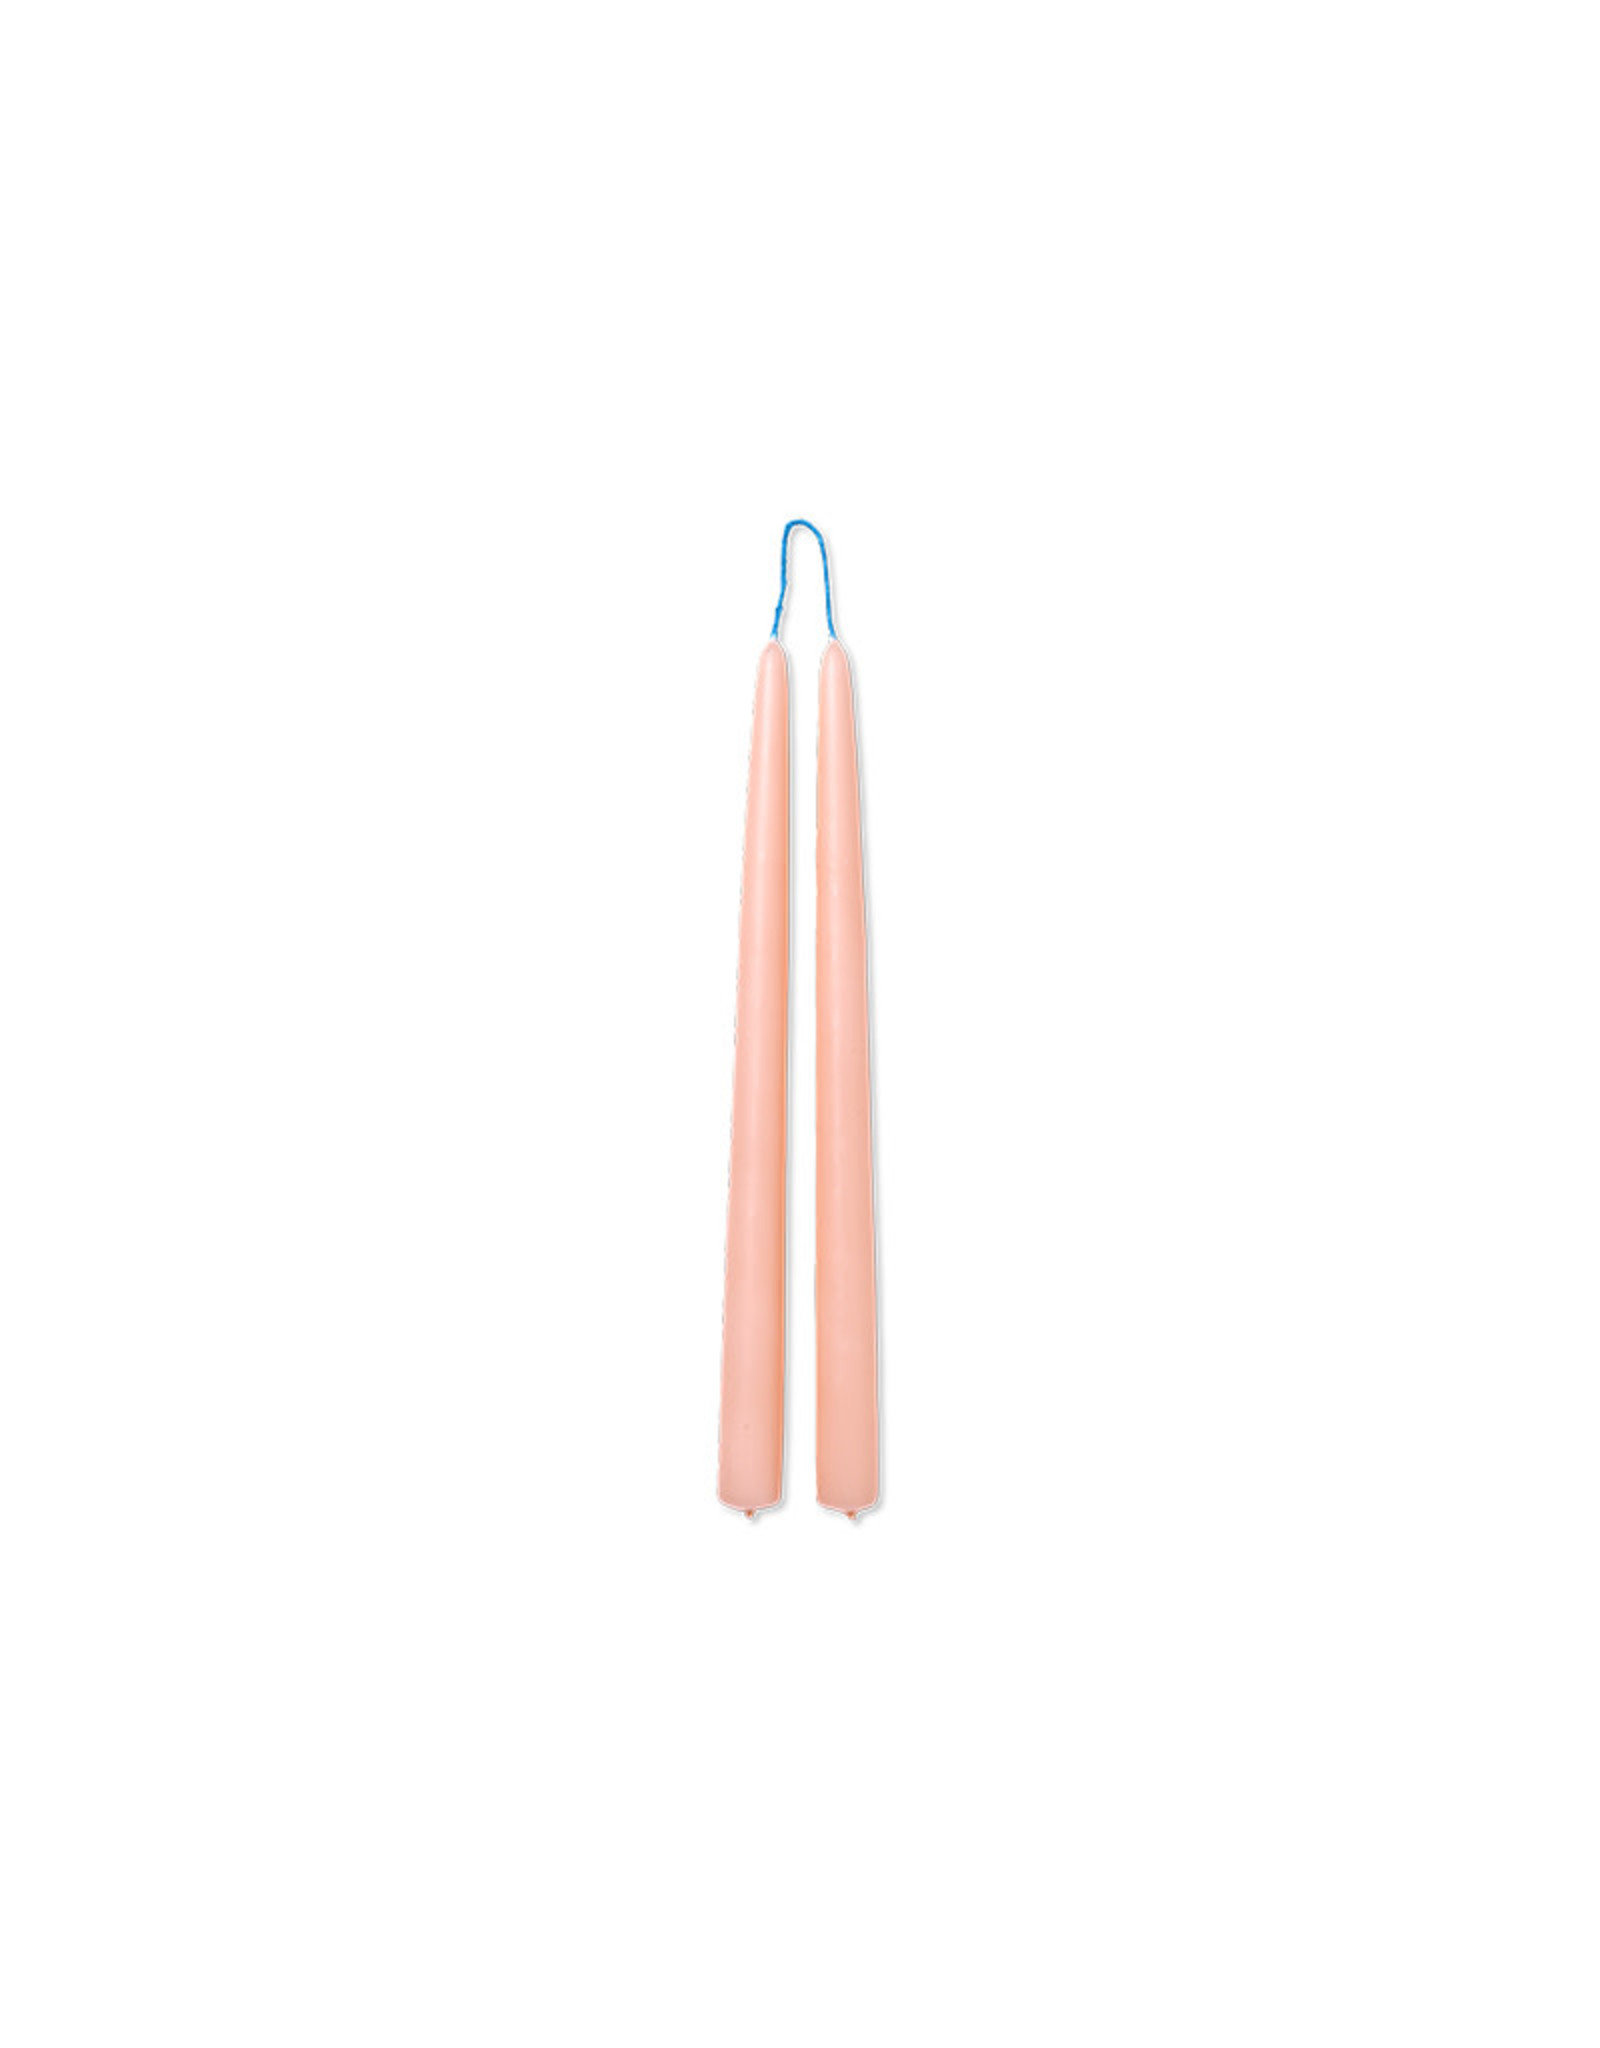 Ferm Living Dipped Candles - Set of 2 - Blush